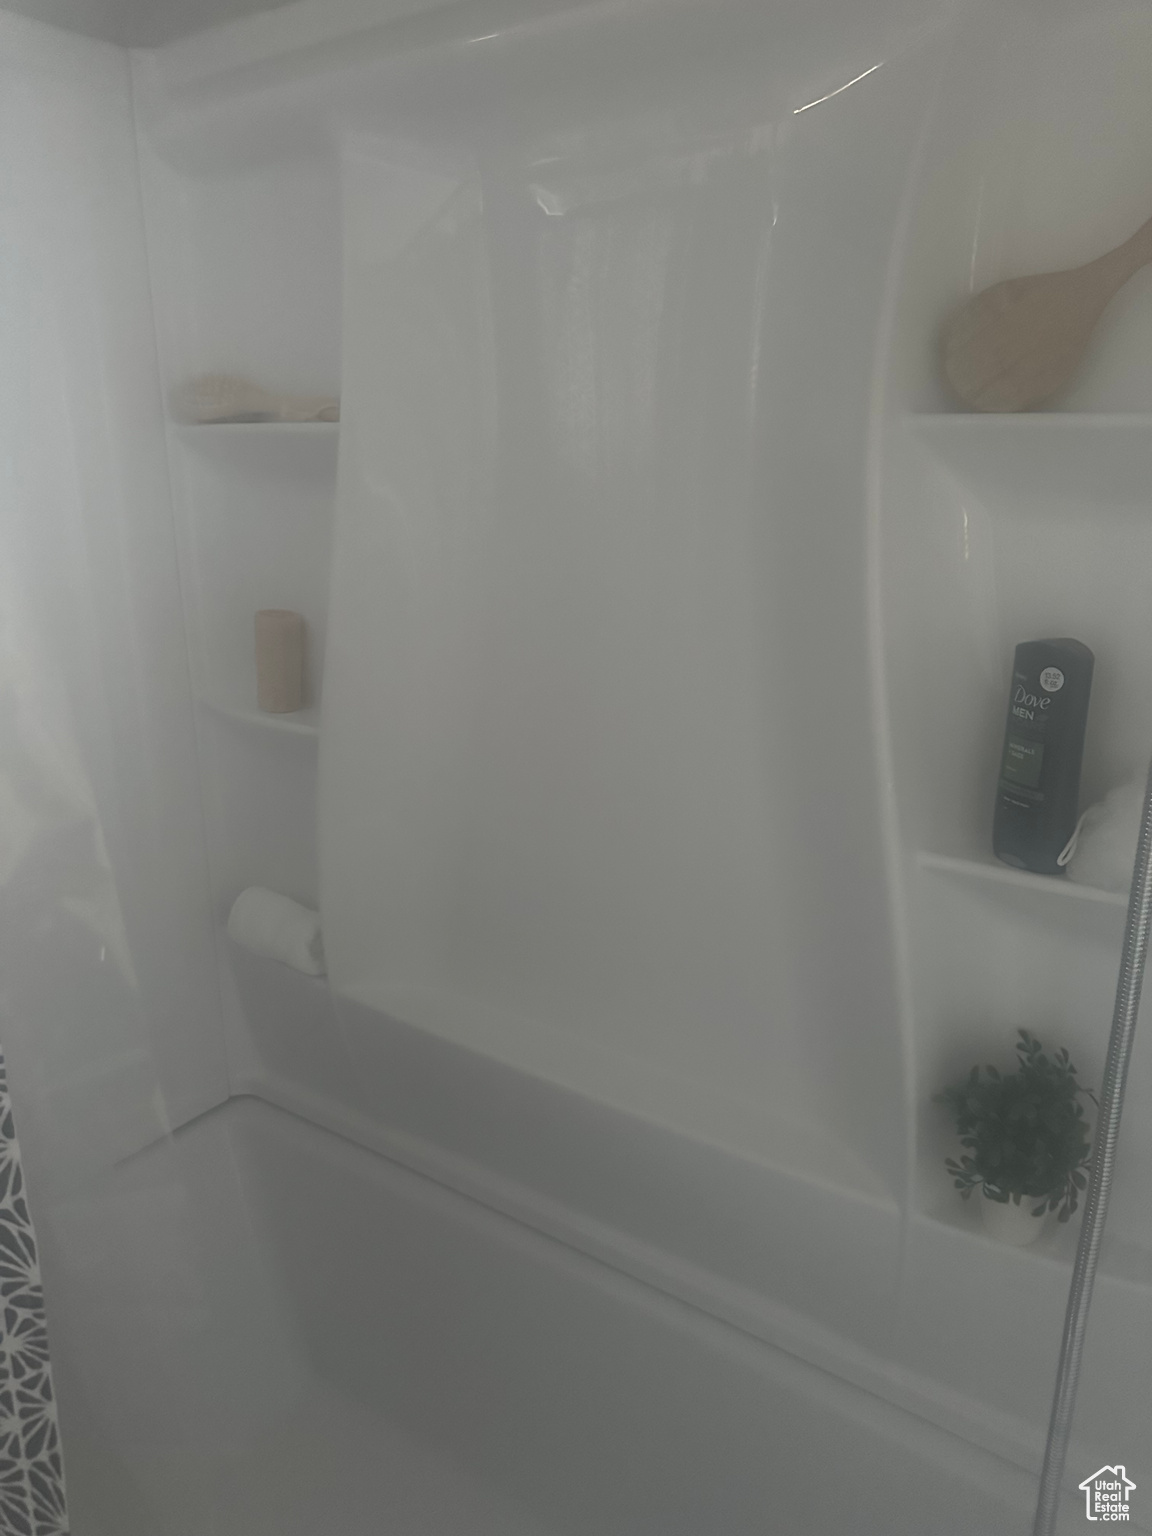 Room details featuring shower / bathing tub combination